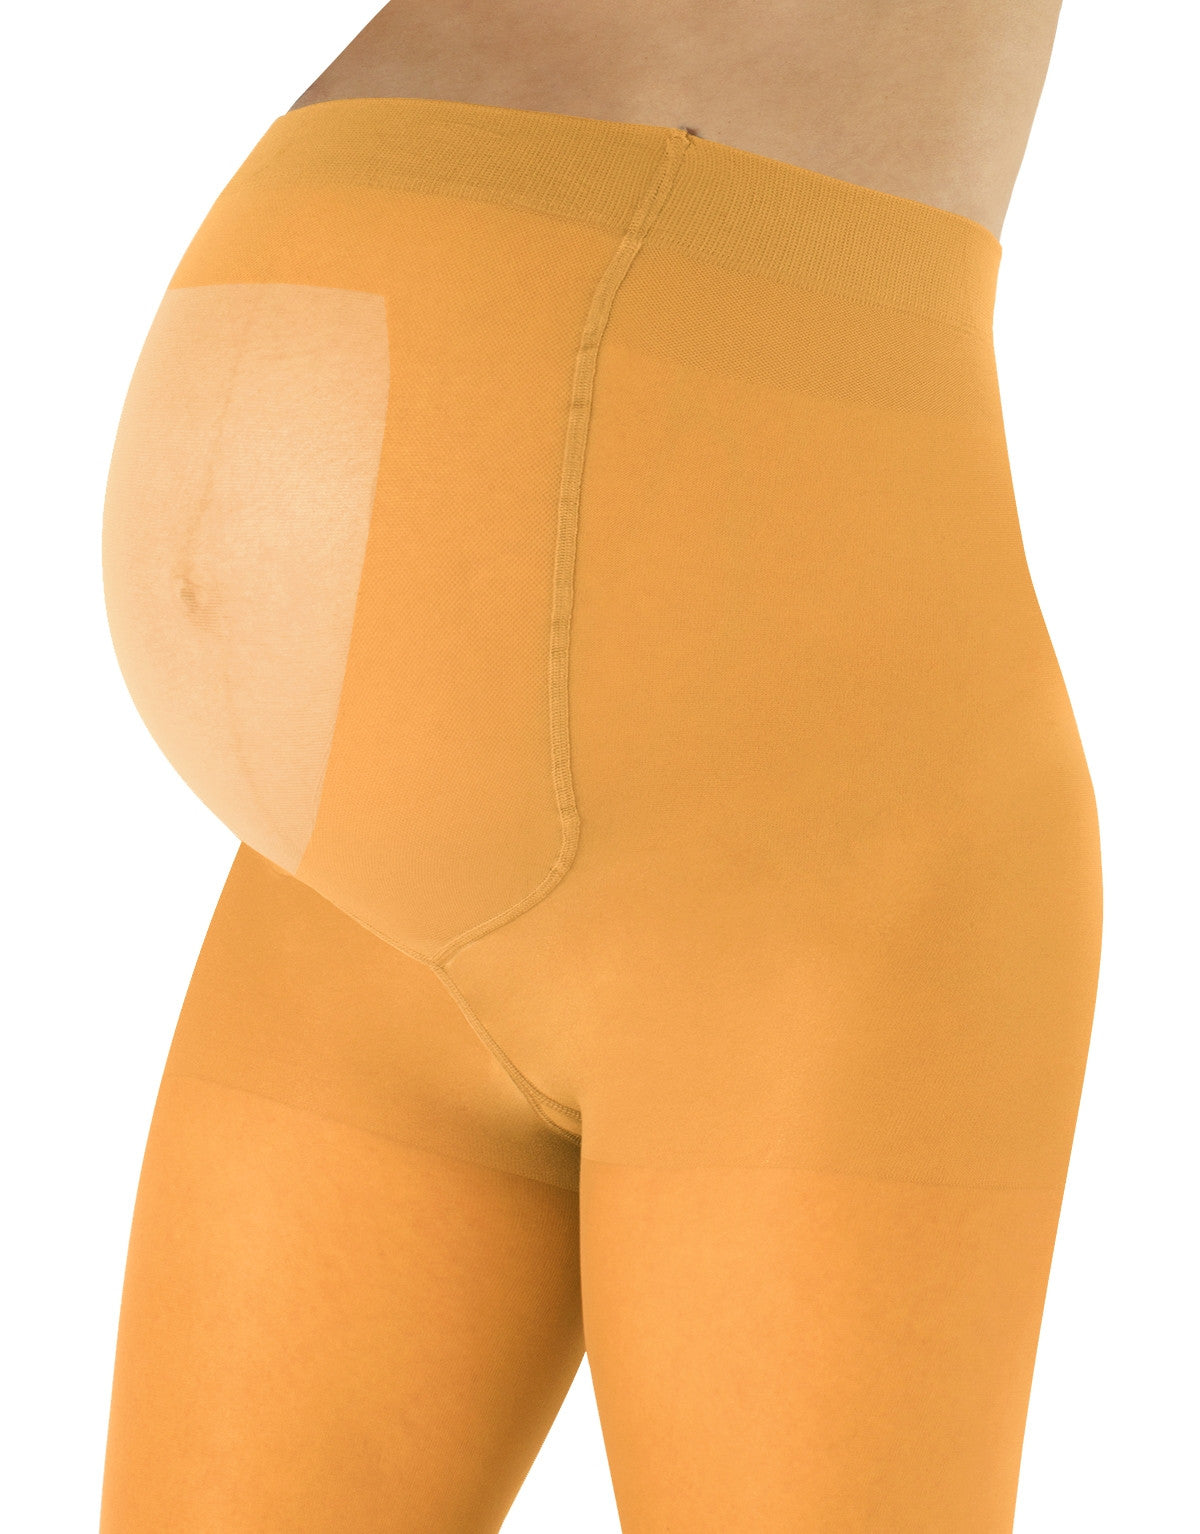 Calzitaly 100 Den Maternity Tights - Light mustard ultra opaque pregnancy tights with an extra panel and flat seam.